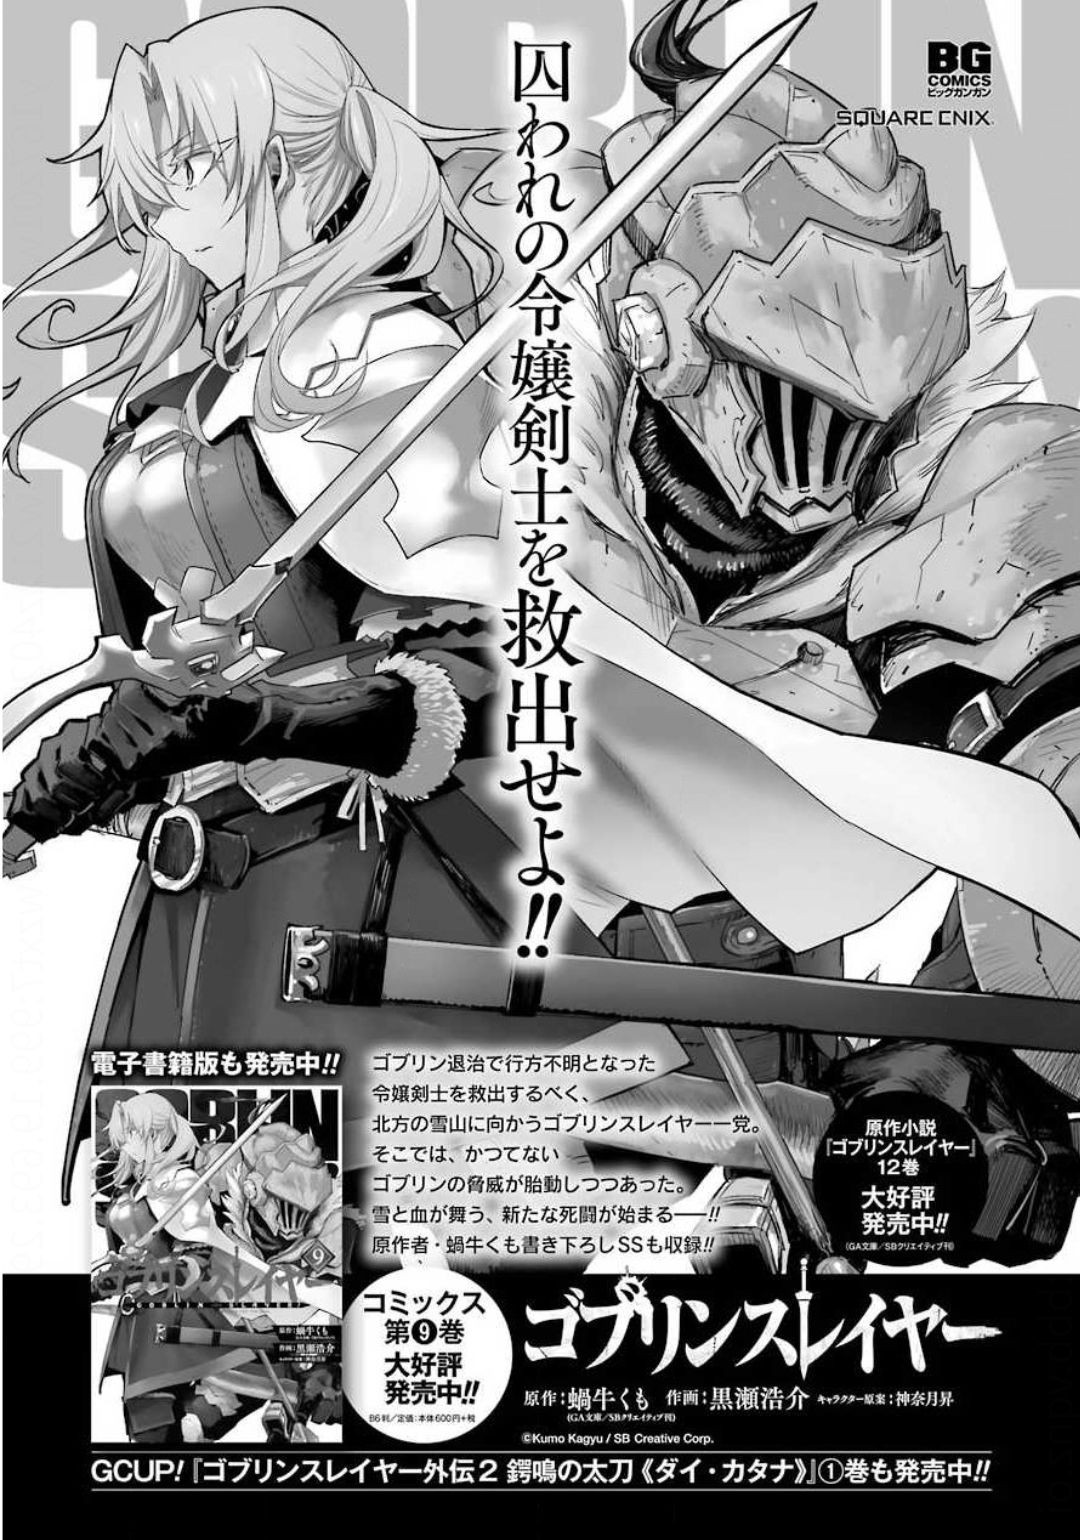 Goblin Slayer - Chapter 49 - Page 1